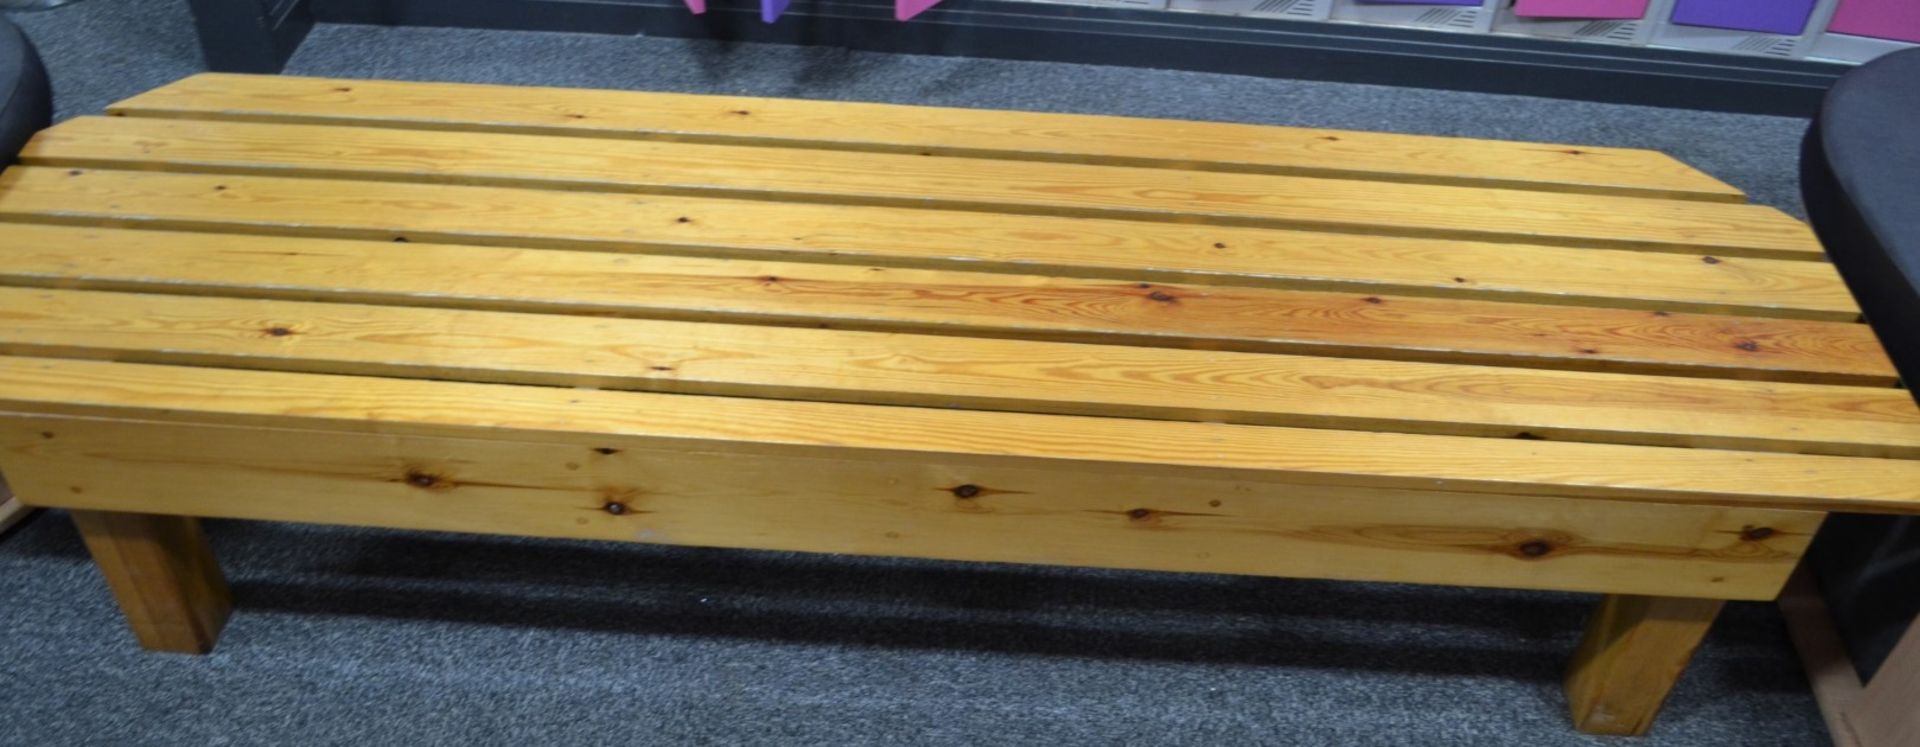 1 x Wooden Rectangular Changing Room Bench - Dimensions: L205 x W65 x H45cm - Ref: J2130/MCR - CL356 - Image 3 of 3